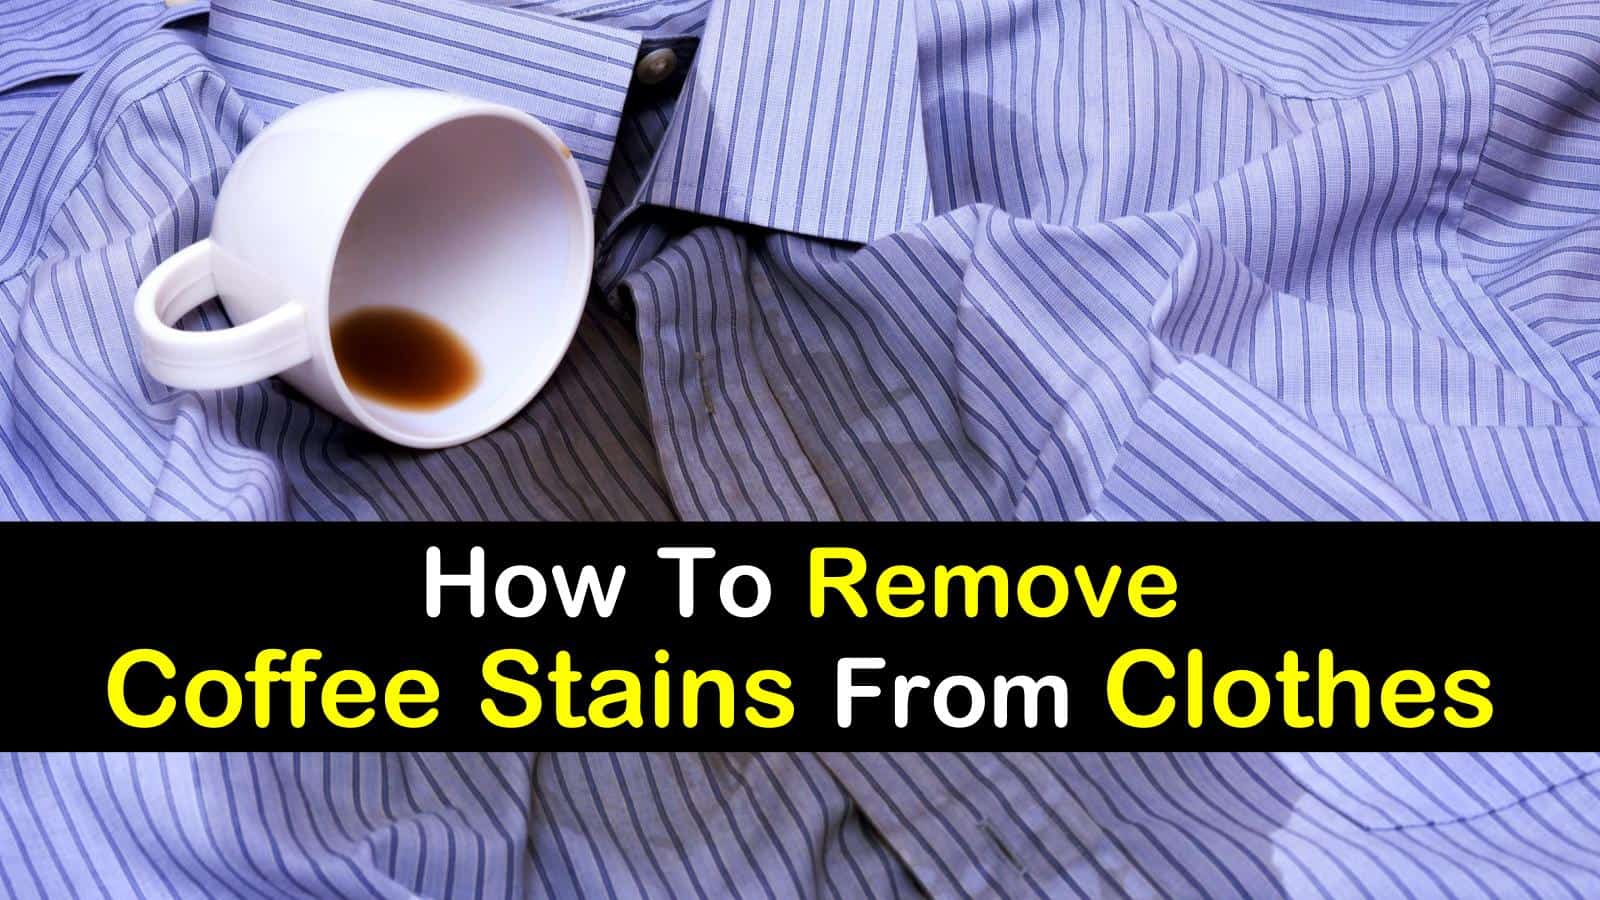 5 Quick &  Clever Ways to Remove Coffee Stains from Clothes